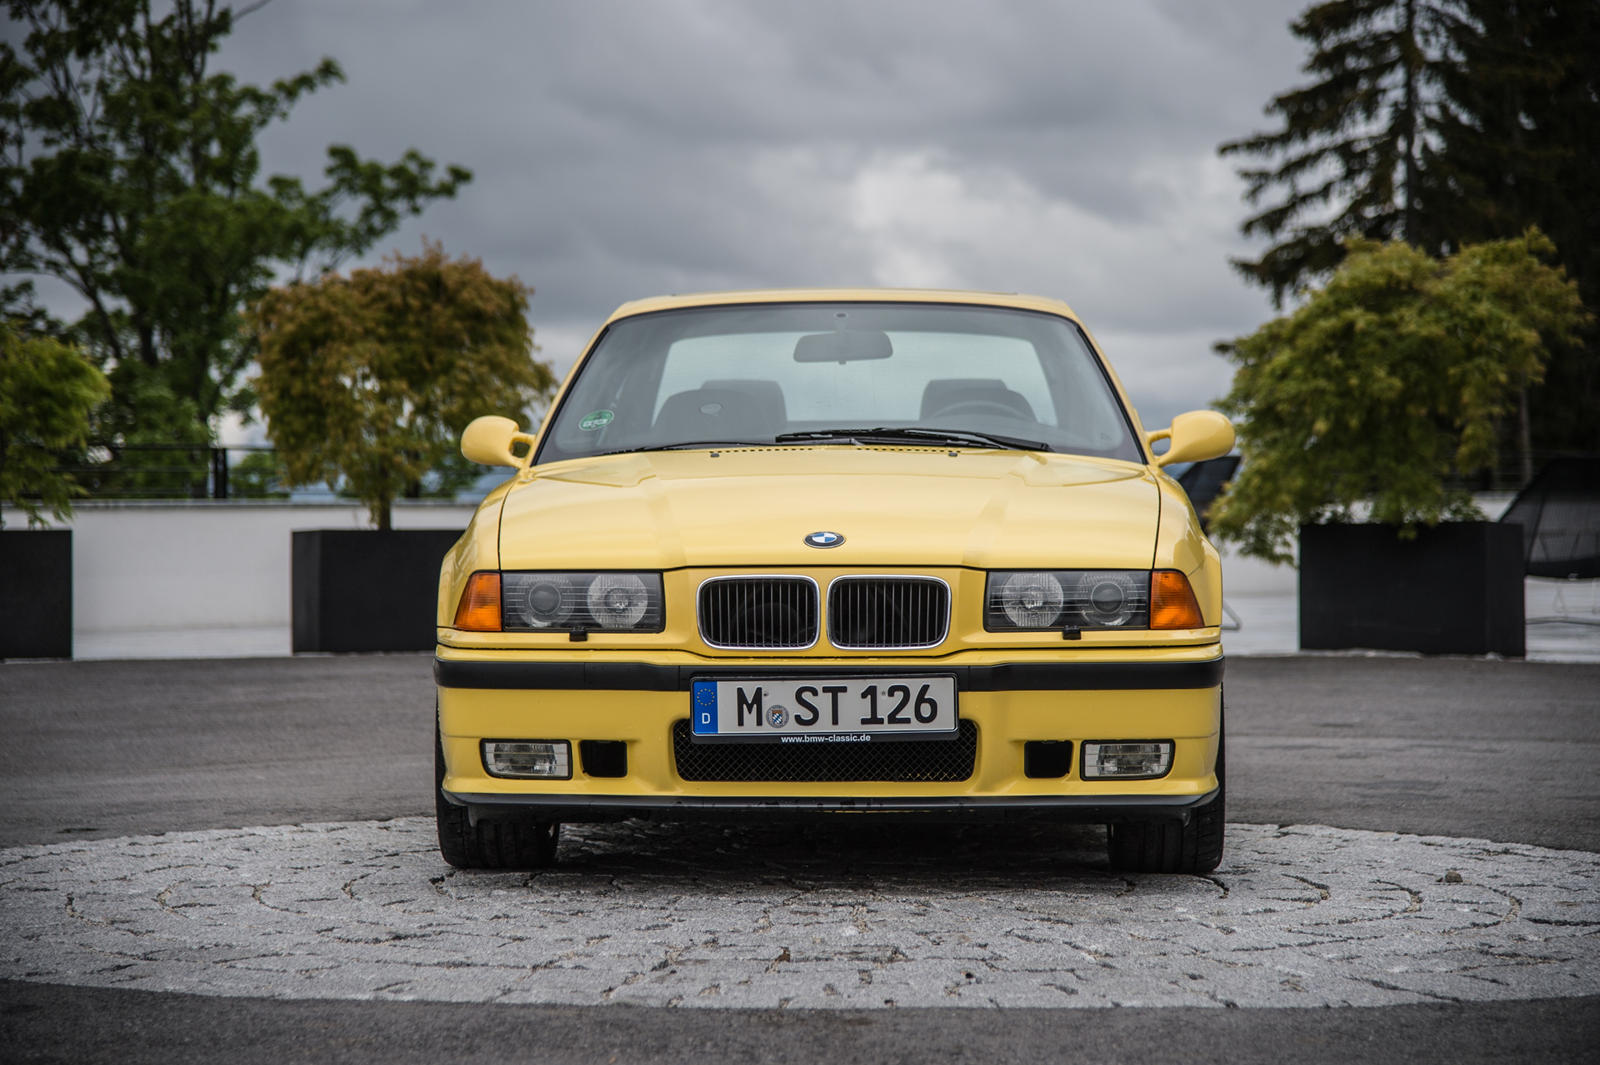 The Ultimate Guide To Buying An E36 BMW